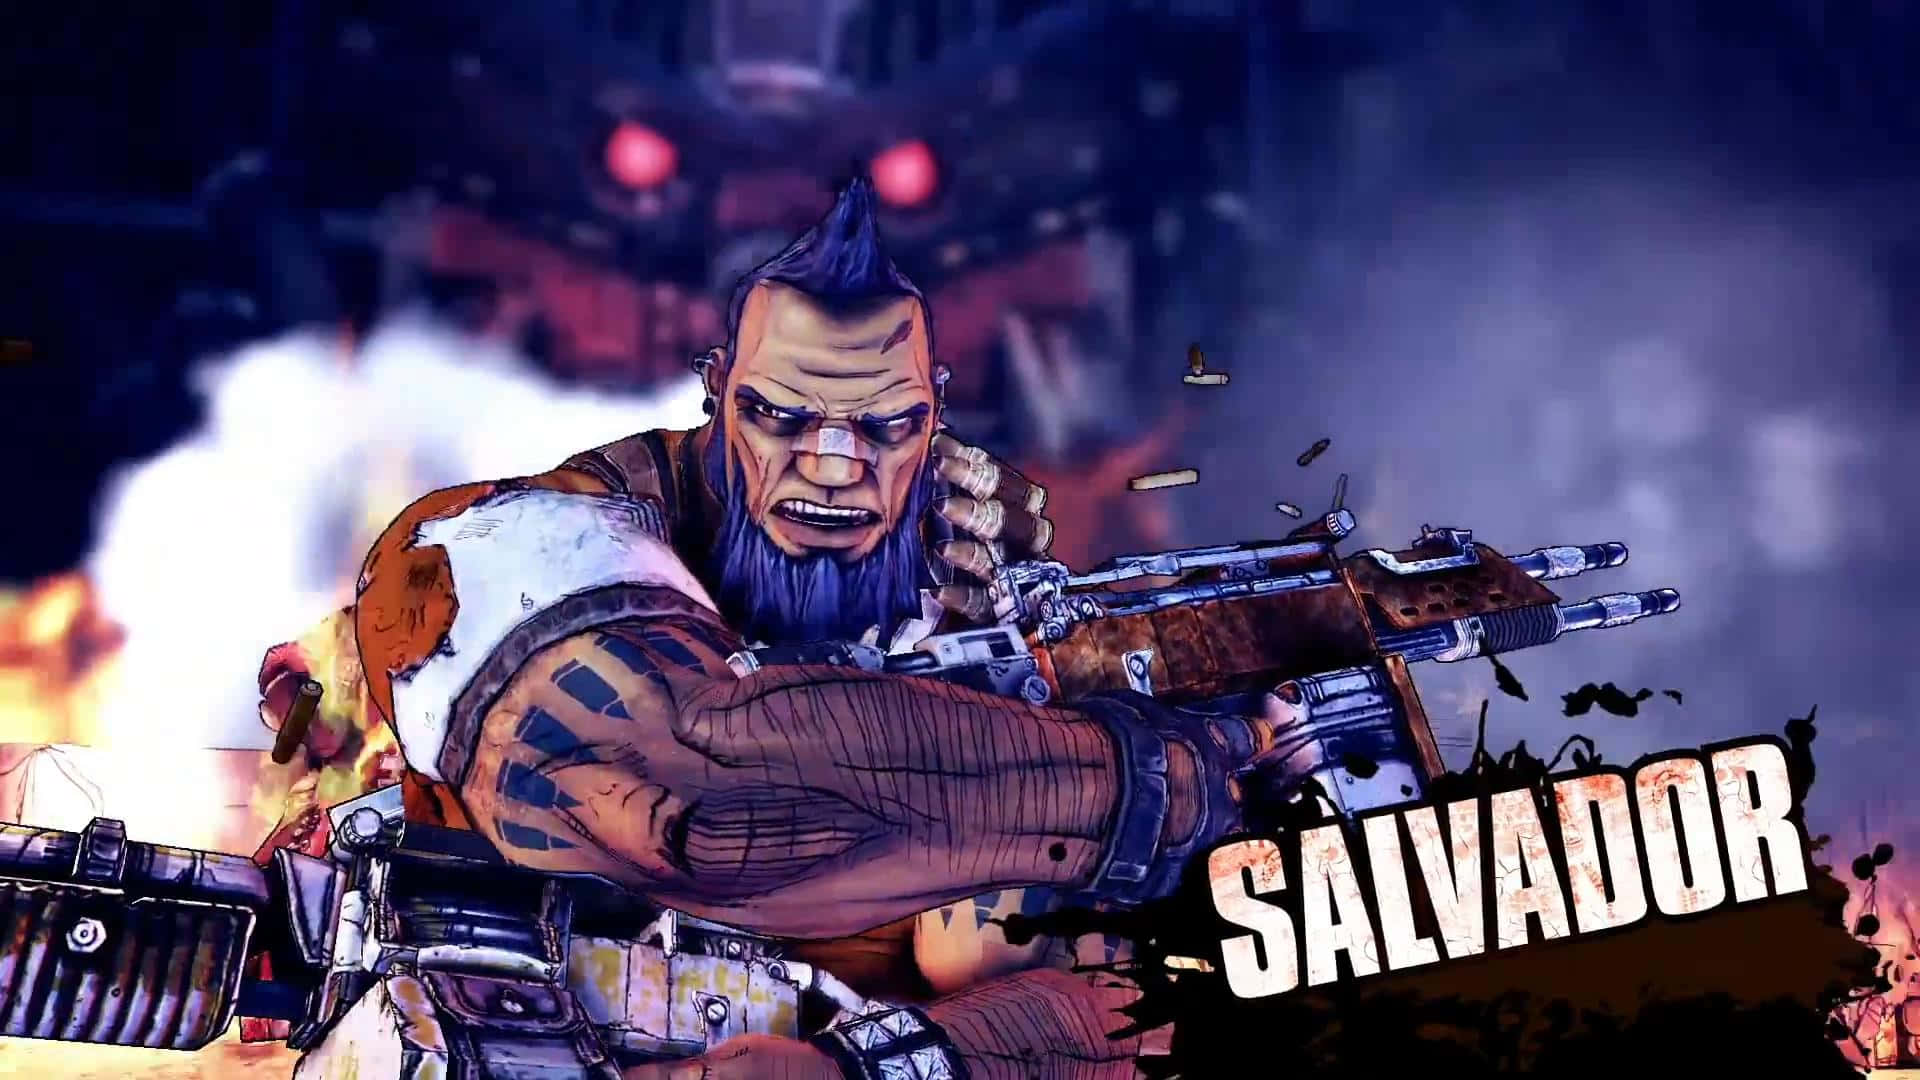 An action-packed journey in the vast world of Borderlands